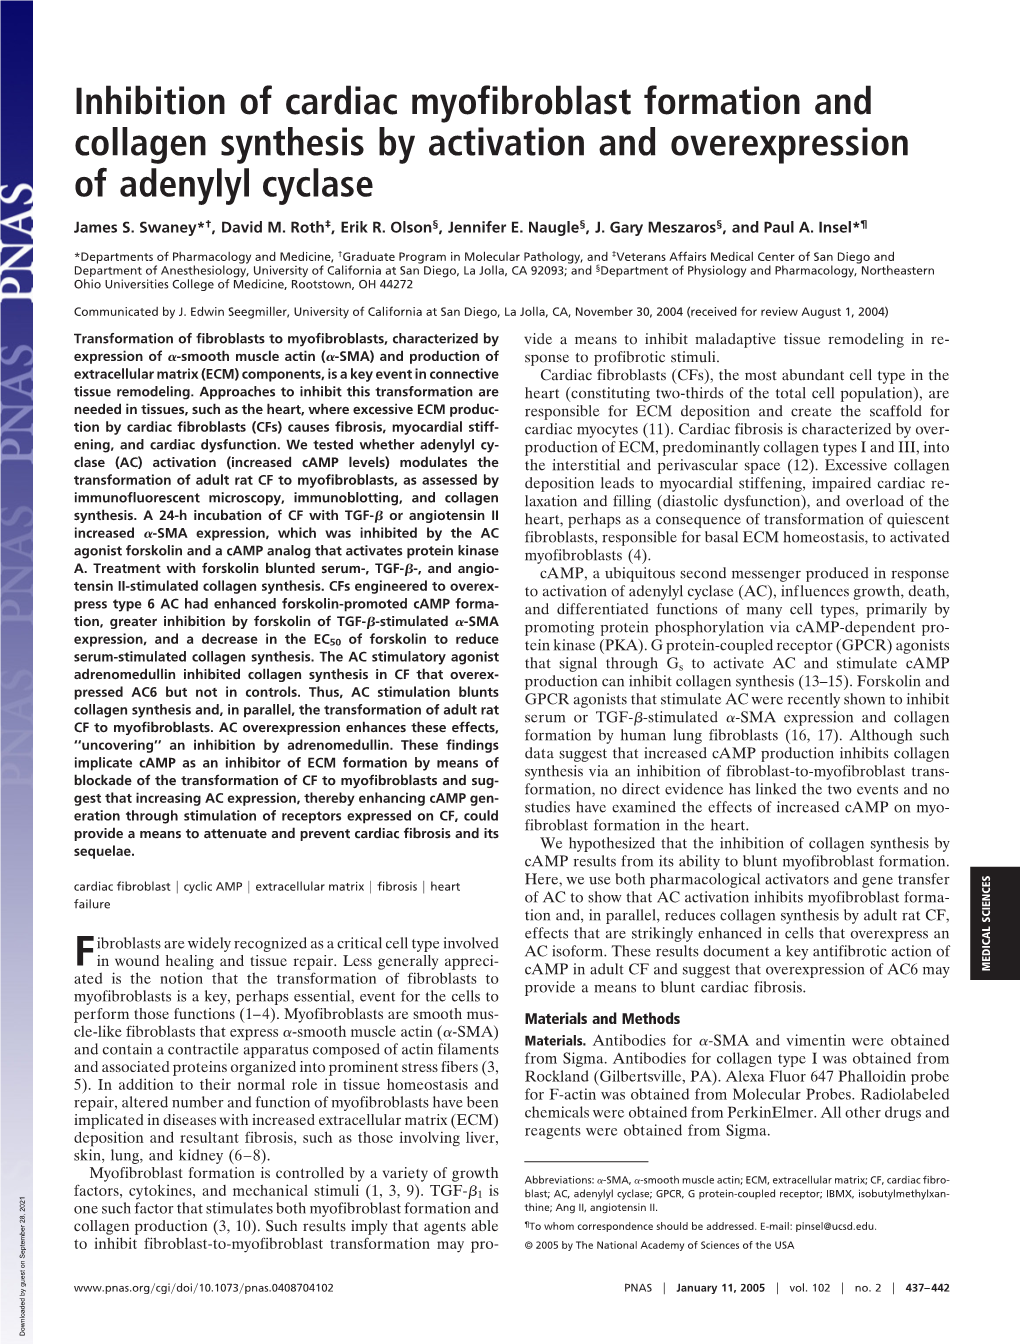 Inhibition of Cardiac Myofibroblast Formation and Collagen Synthesis by Activation and Overexpression of Adenylyl Cyclase